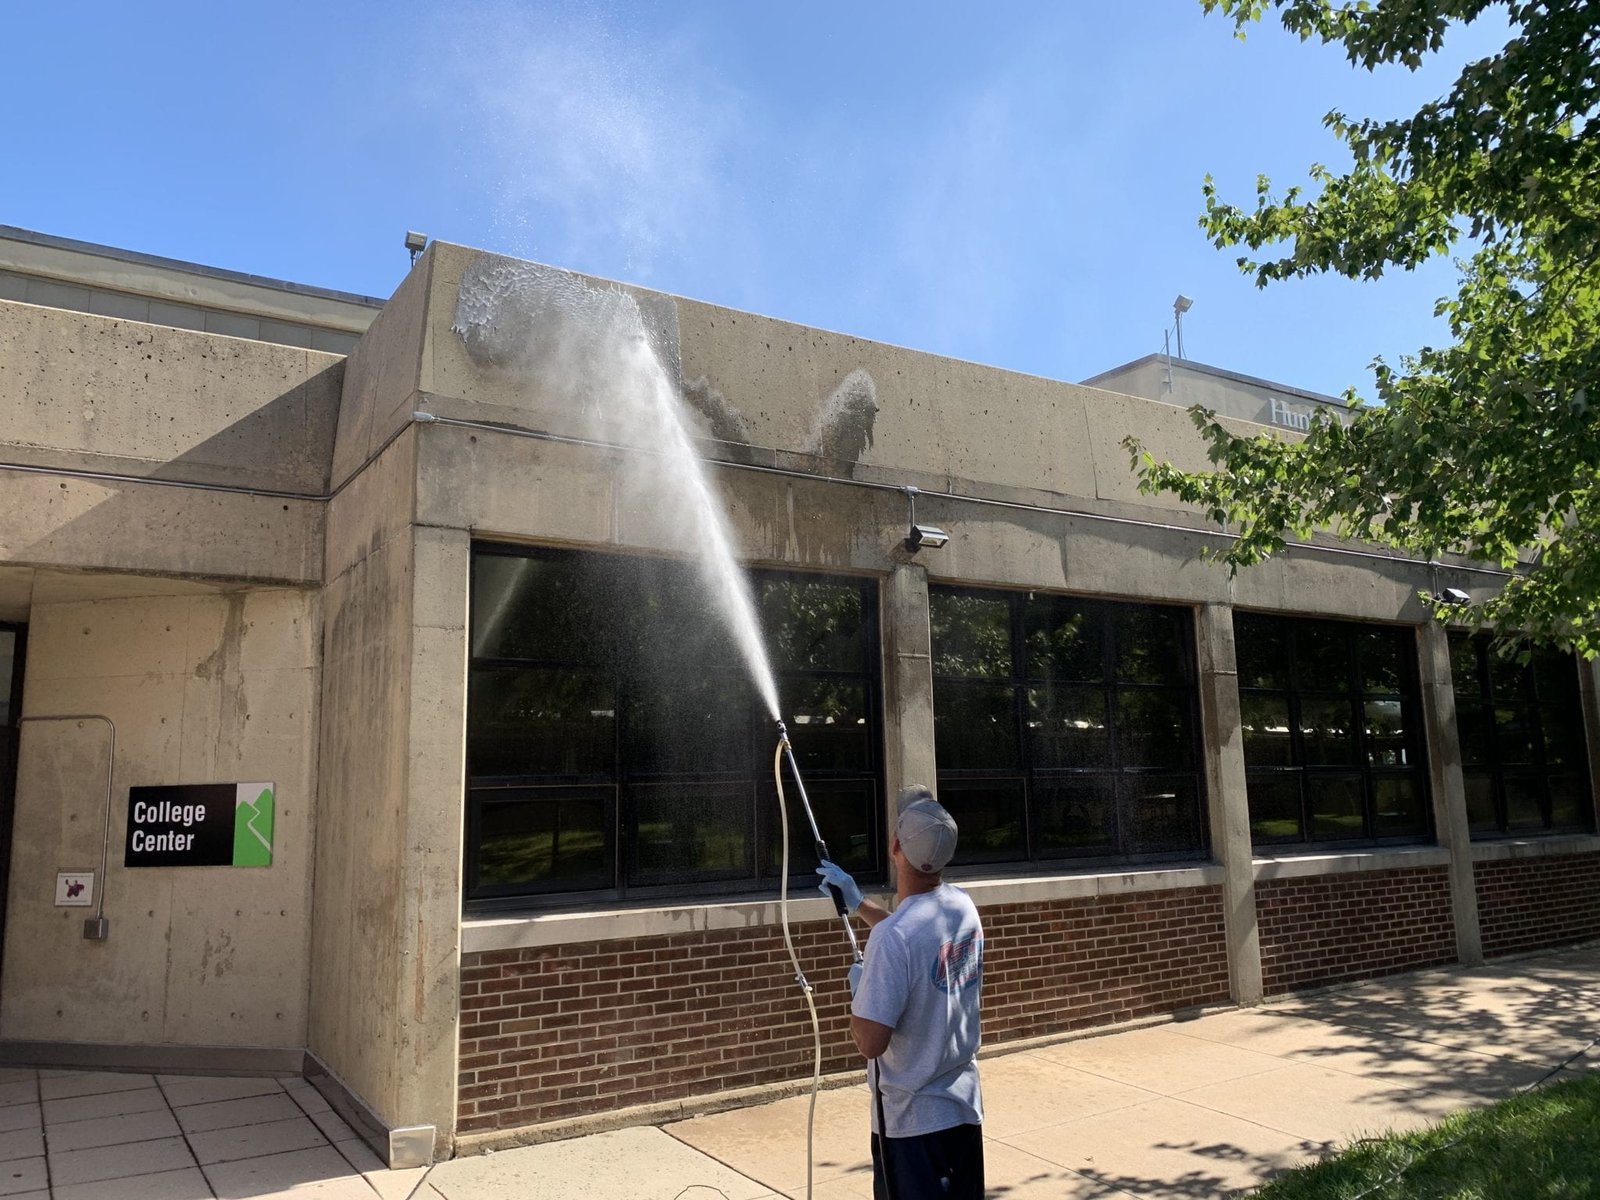 Commercial Building Cleaning services from PSI Pressure Washing. Call Today.